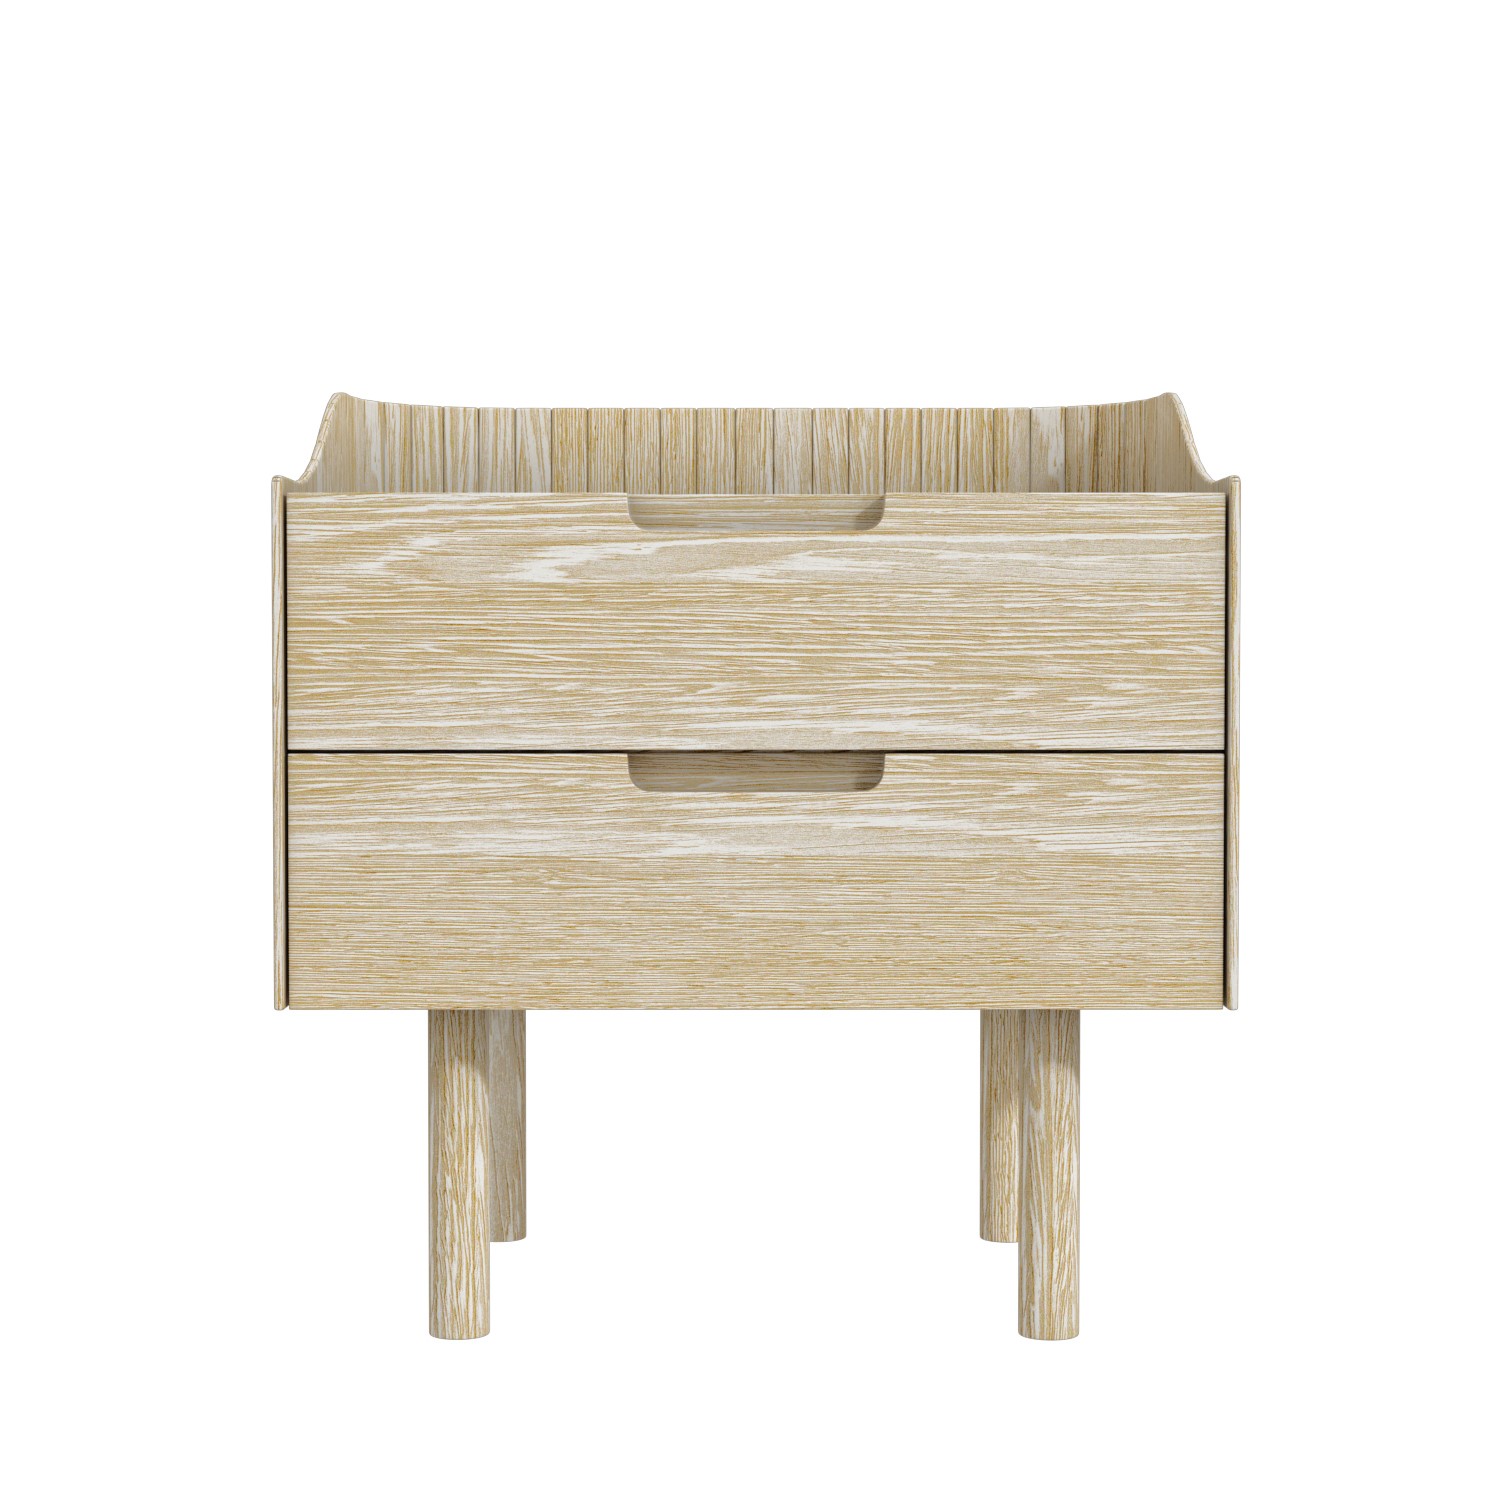 Read more about Light wood mid-century modern 2 drawer bedside table saskia